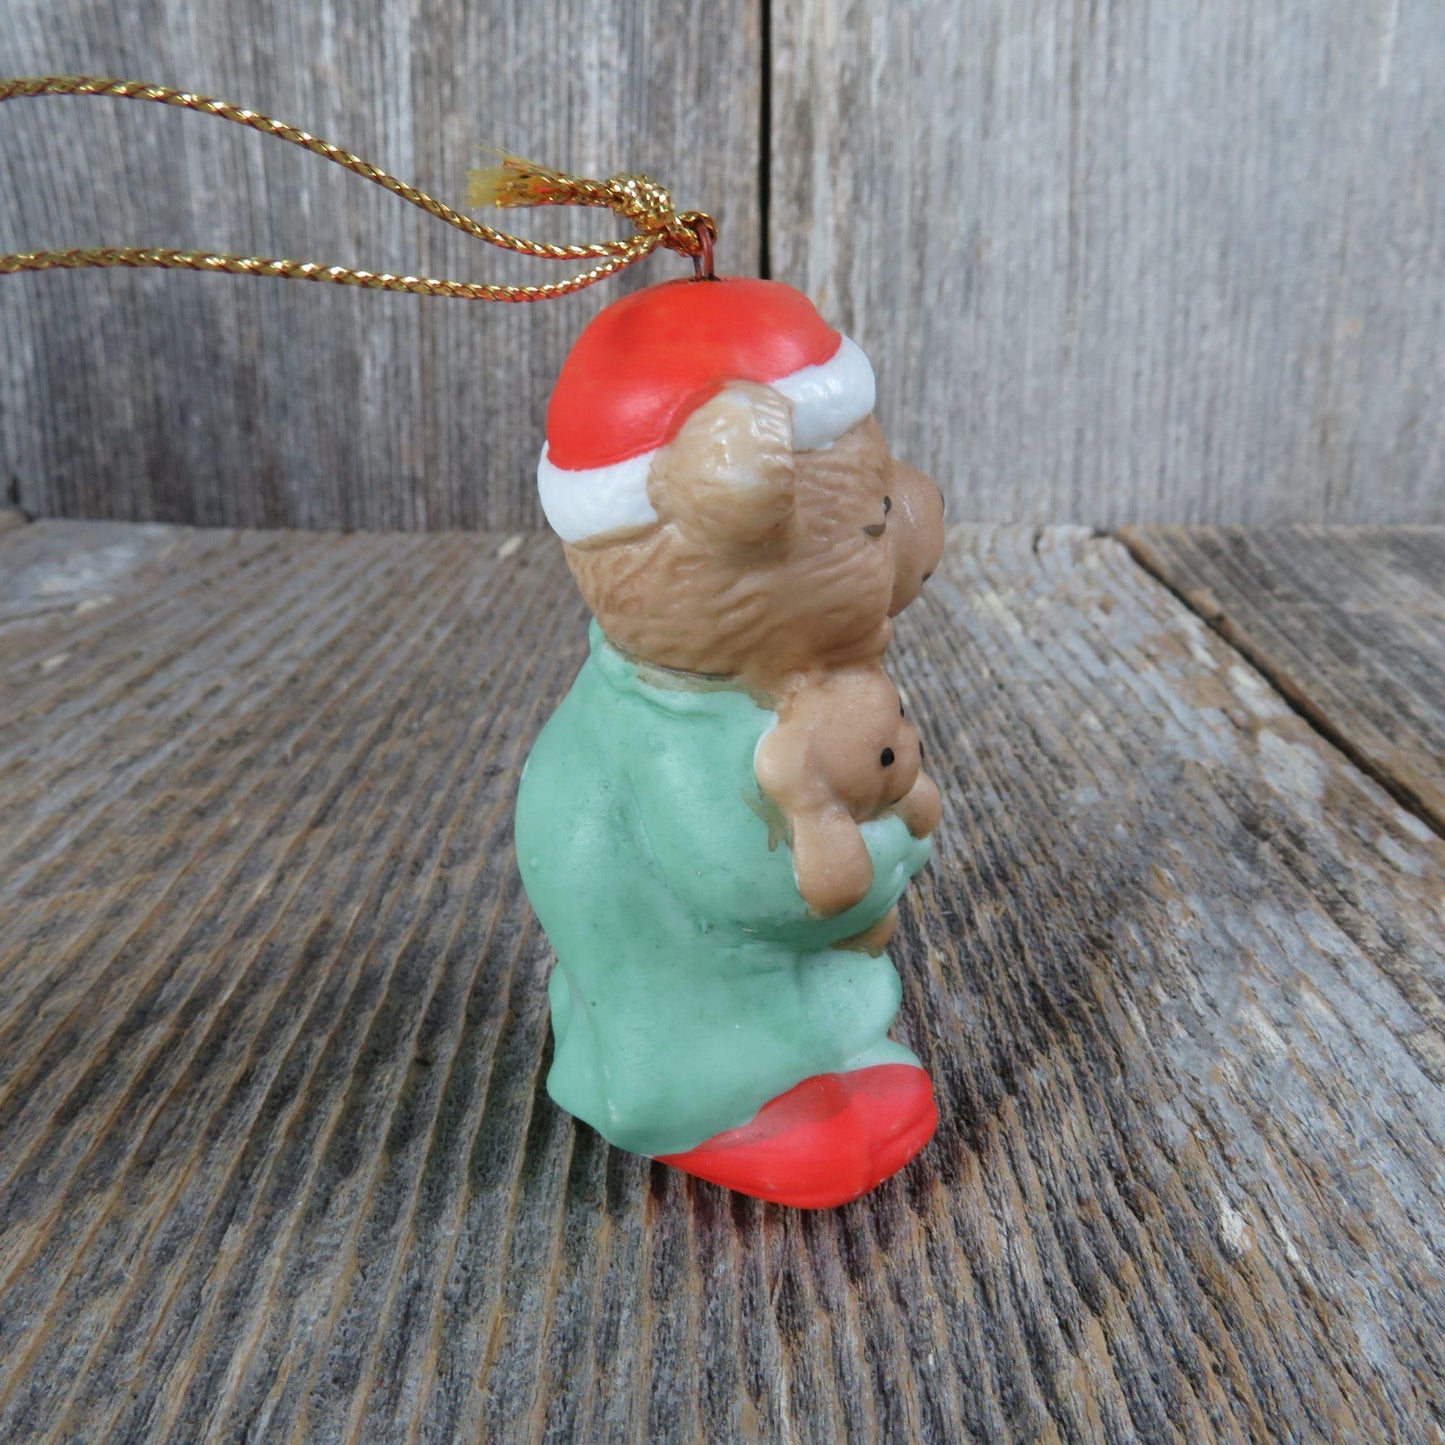 Vintage Bear In Pajamas Teddy and Candle Ornament Ceramic Porcelain Christmas